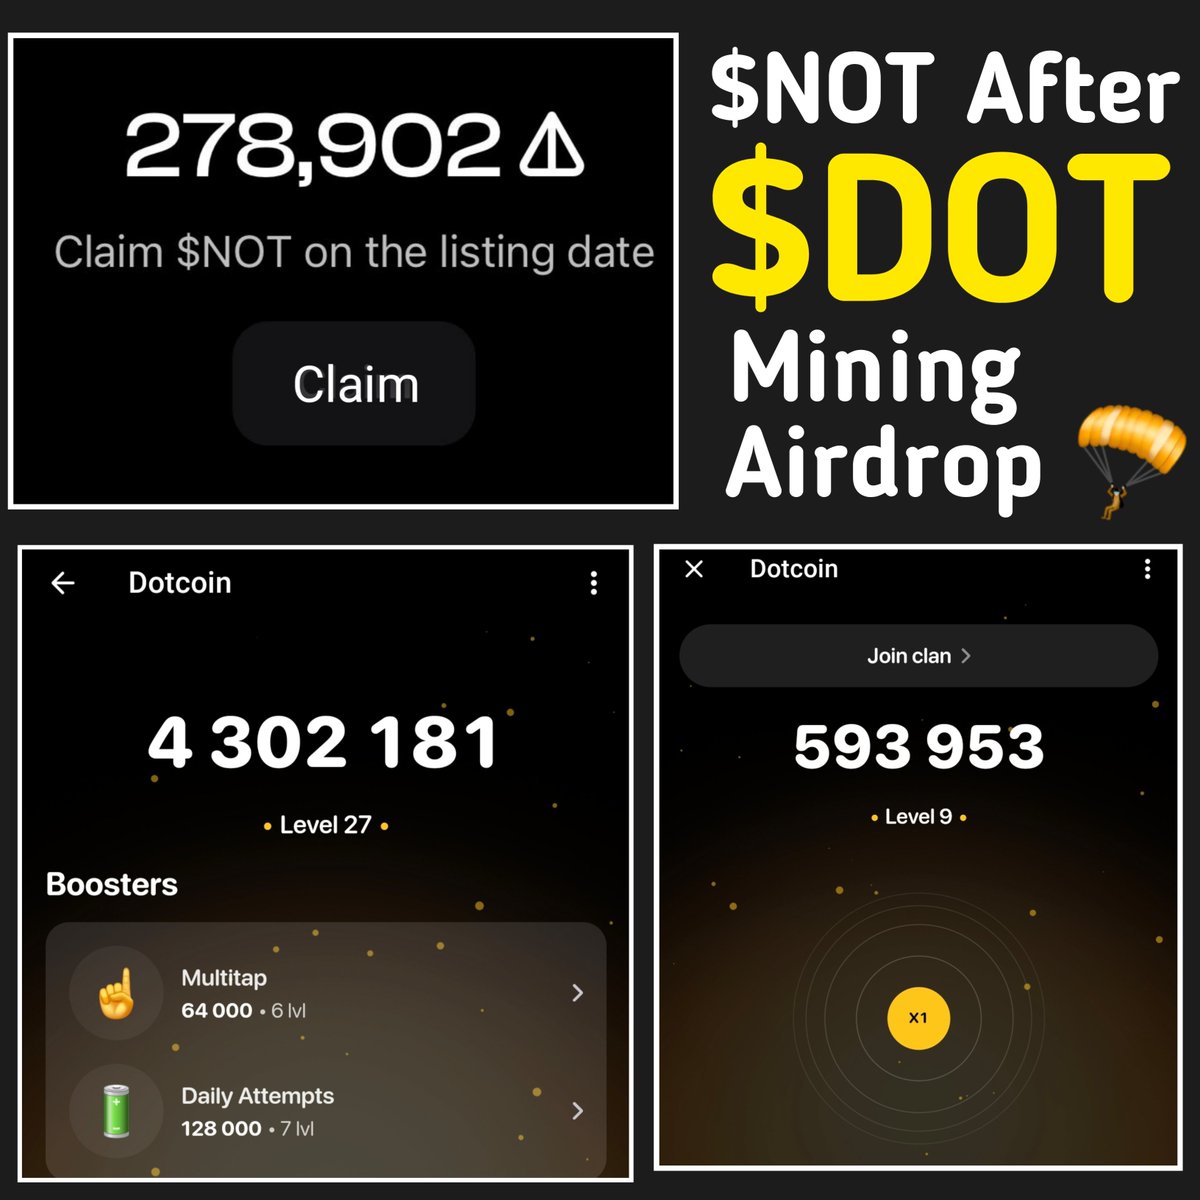 Congratulations 🎉 $DOT mining started on not coin, you can trust $DOT 100% as it can also be a project of $TON and $NOT 🪂 🪂 $DOT Mining ⛏️ 👇 t.me/dotcoin_bot?st…